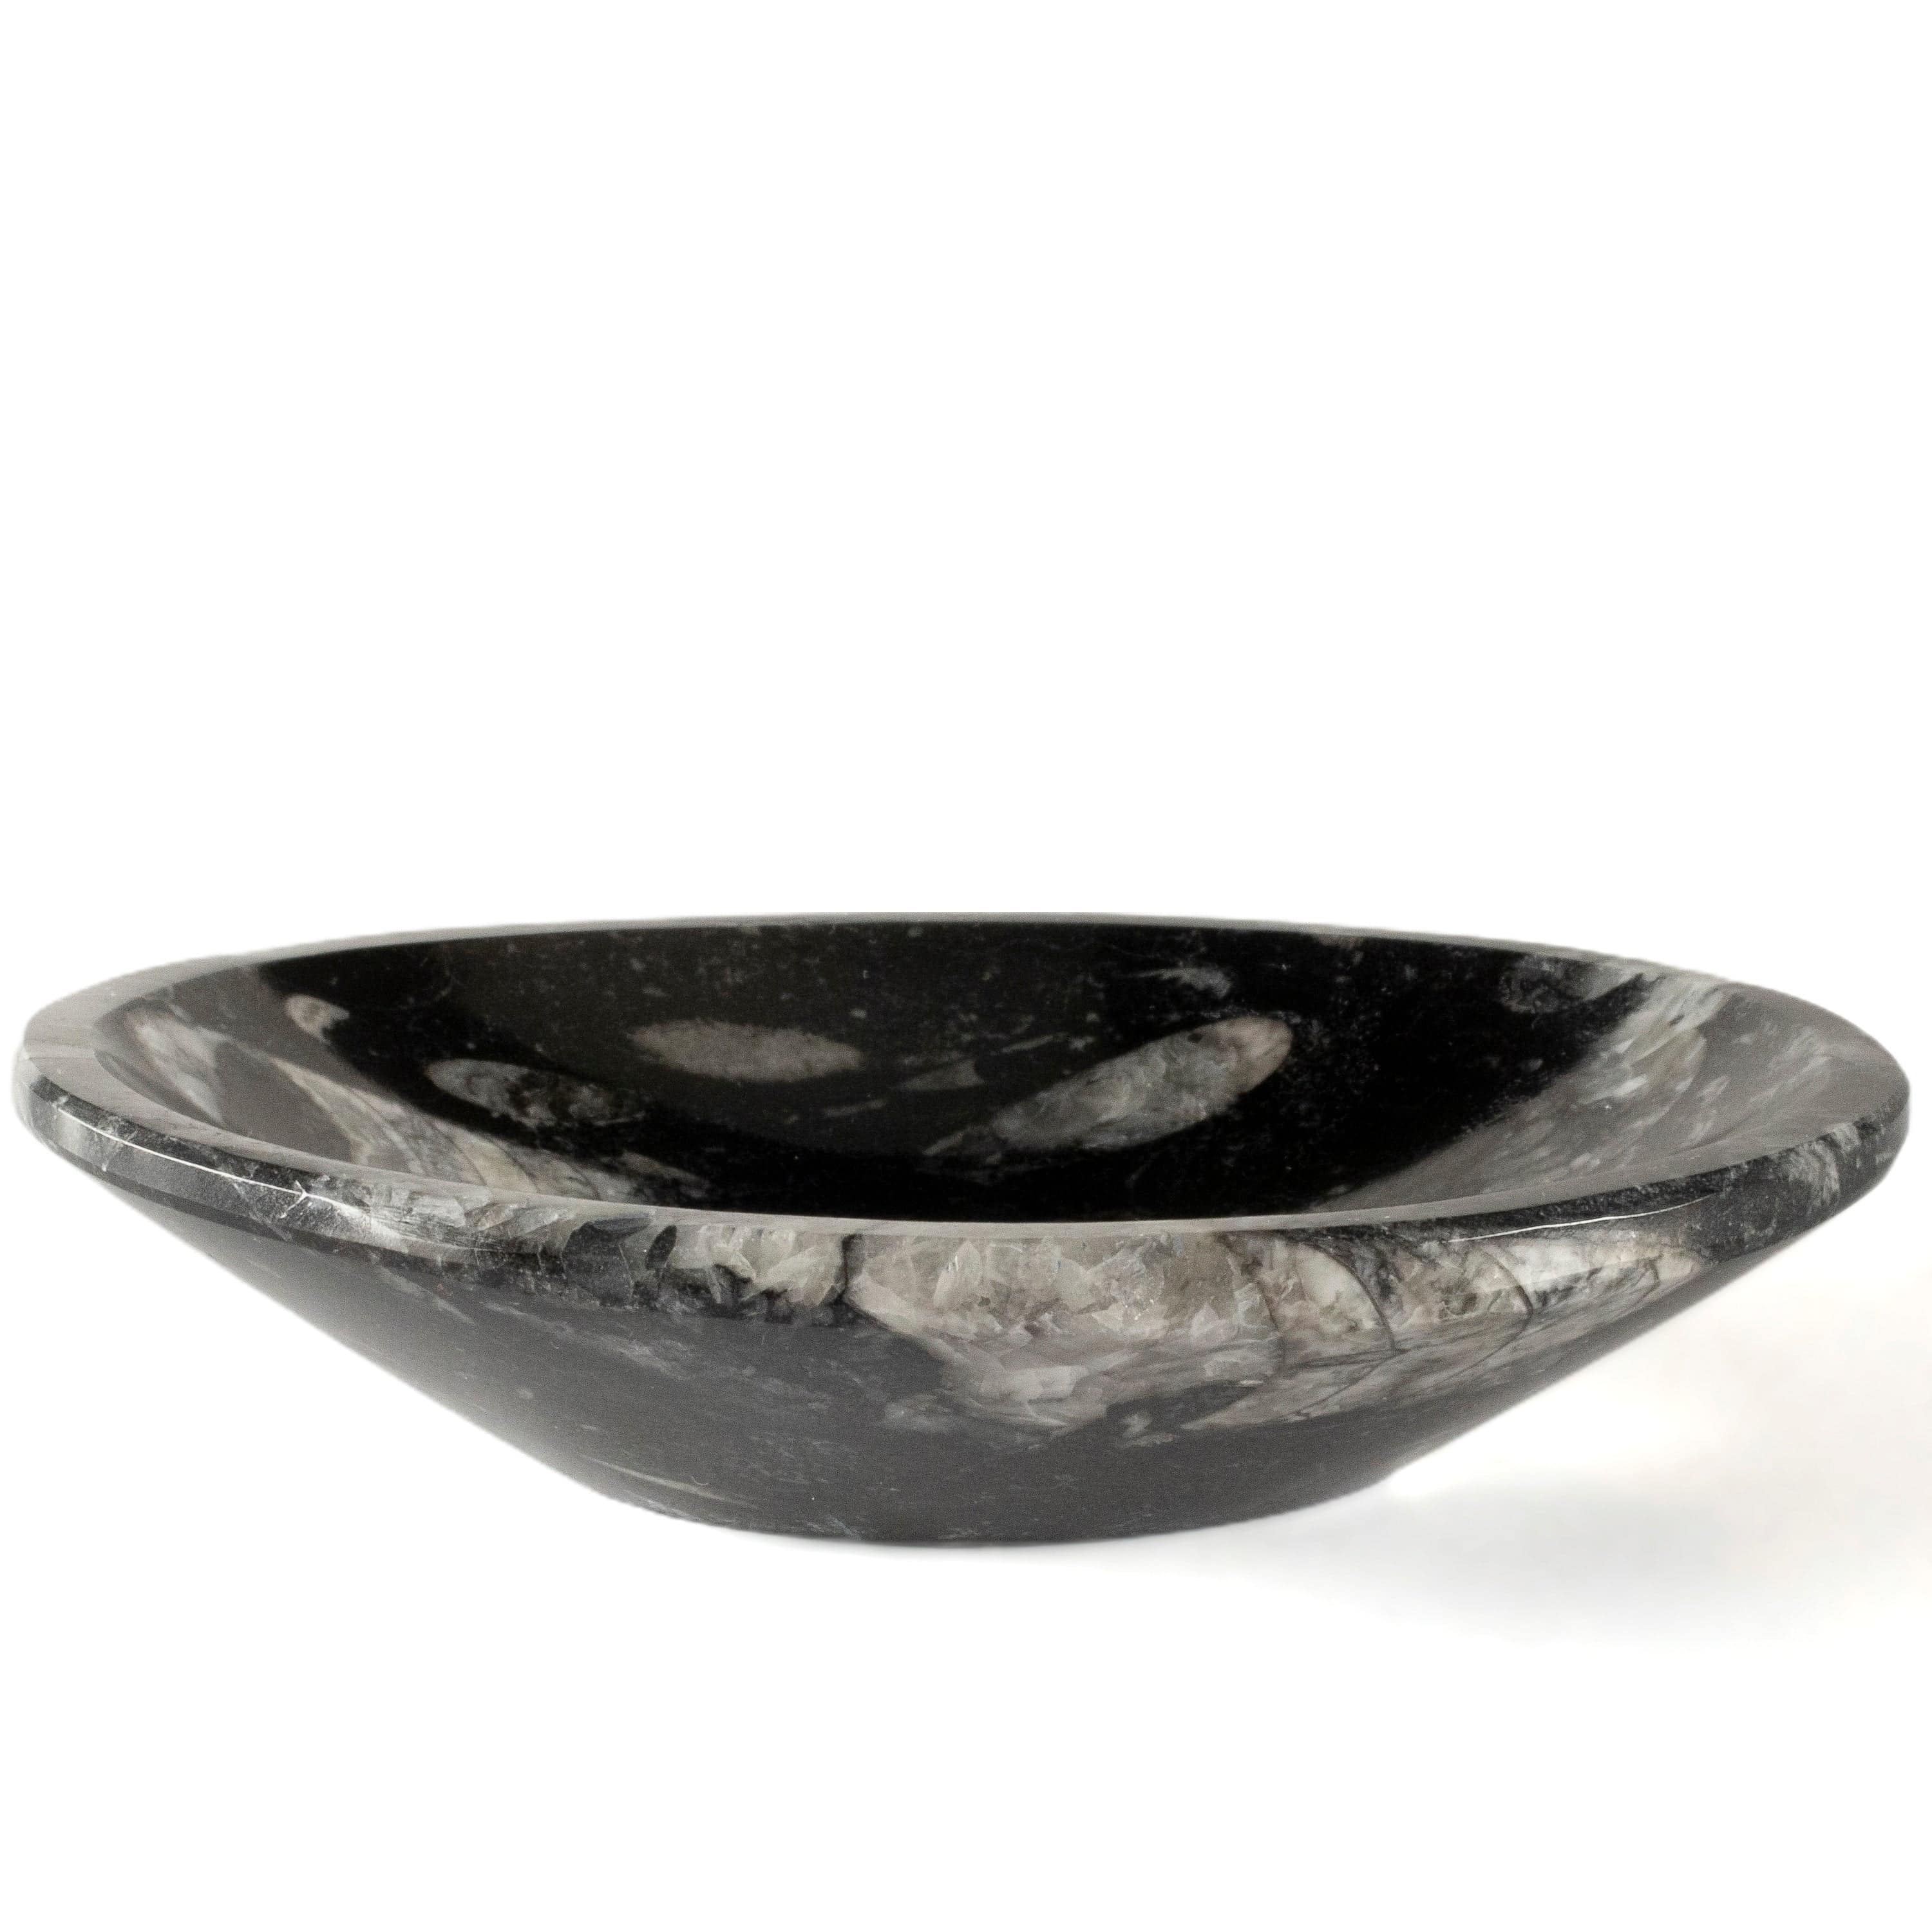 Kalifano Fossils & Minerals Natural Black Orthoceras Bowl from Morocco - 6" BORO140